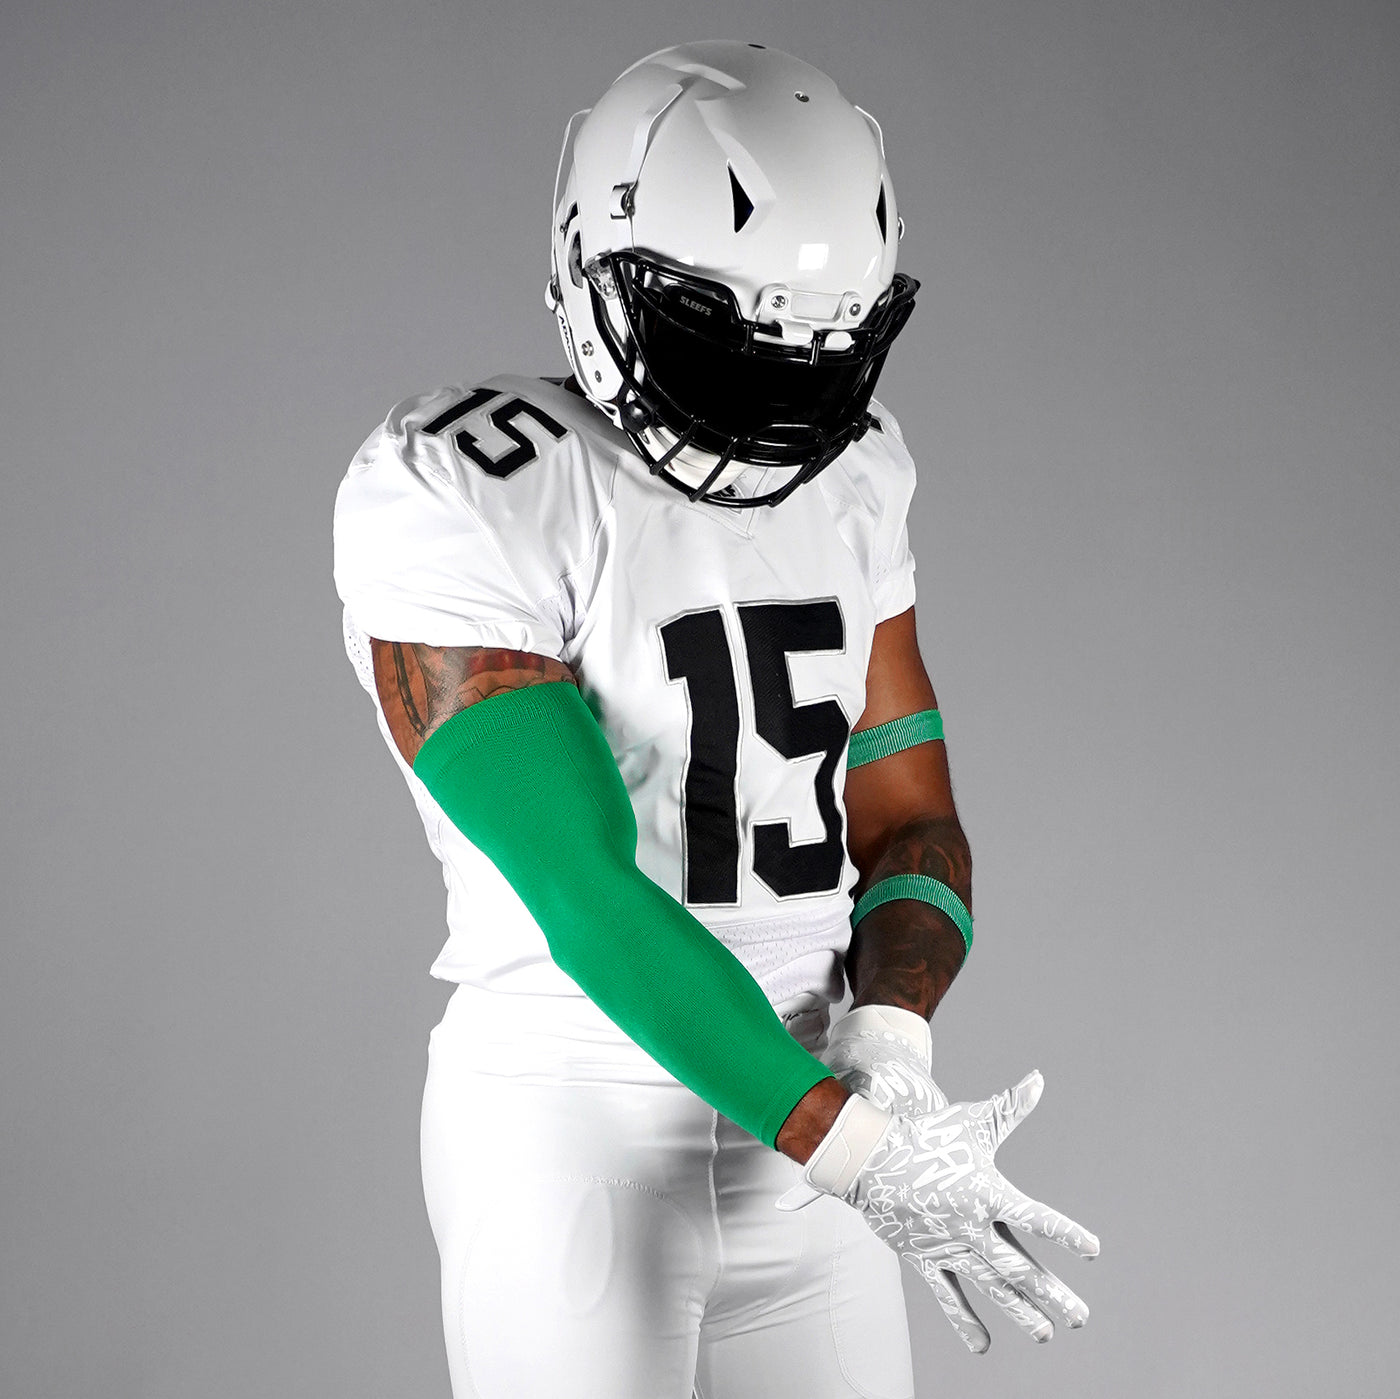 Hue Green One Size Fits All Football Arm Sleeve